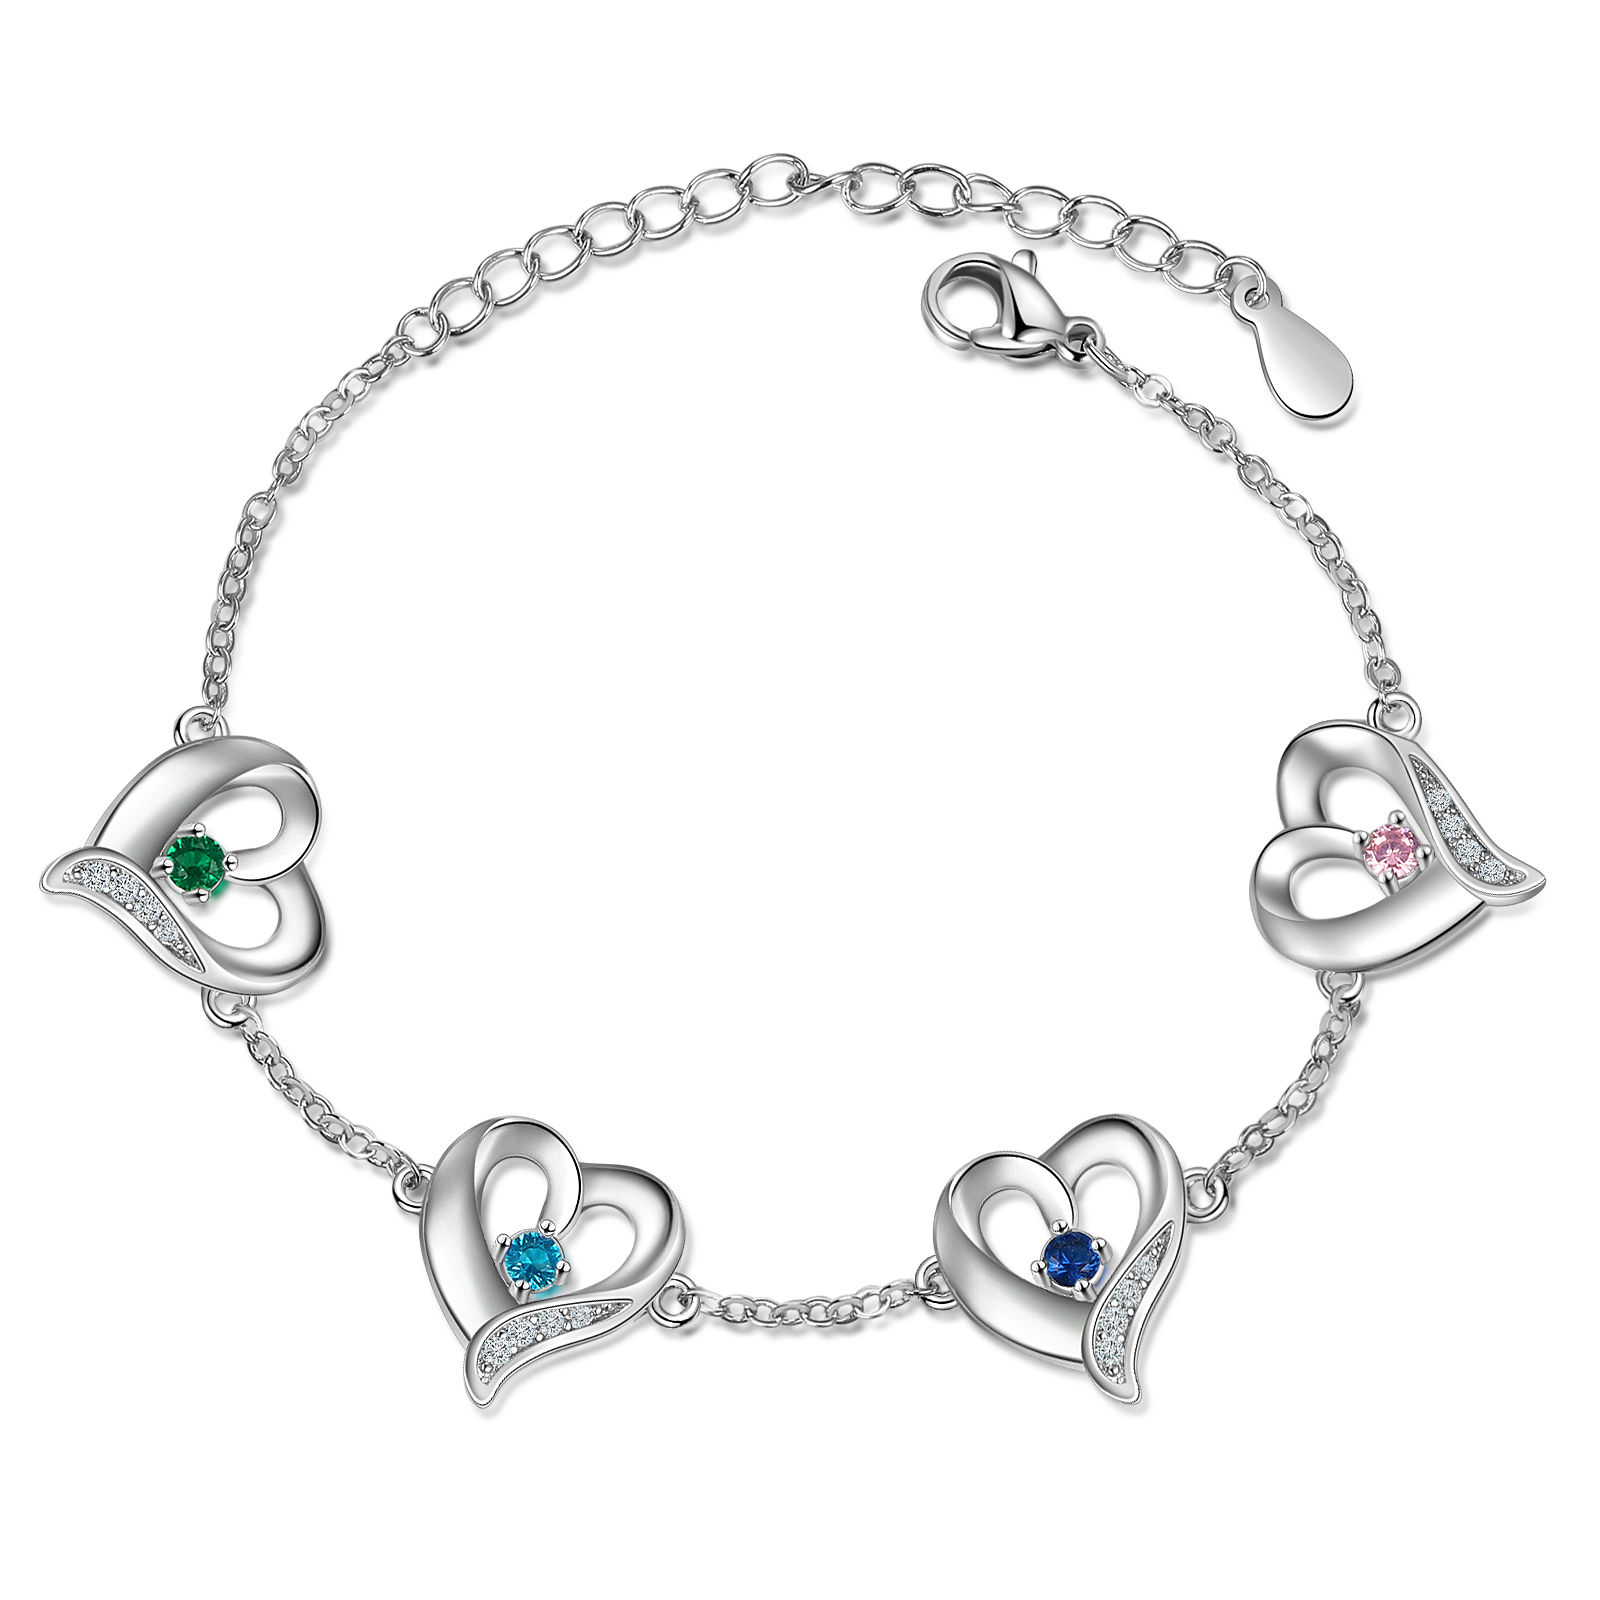 4 Names-Personalized Heart Bracelet With 4 Birthstones Engraved Names Bangle For Her